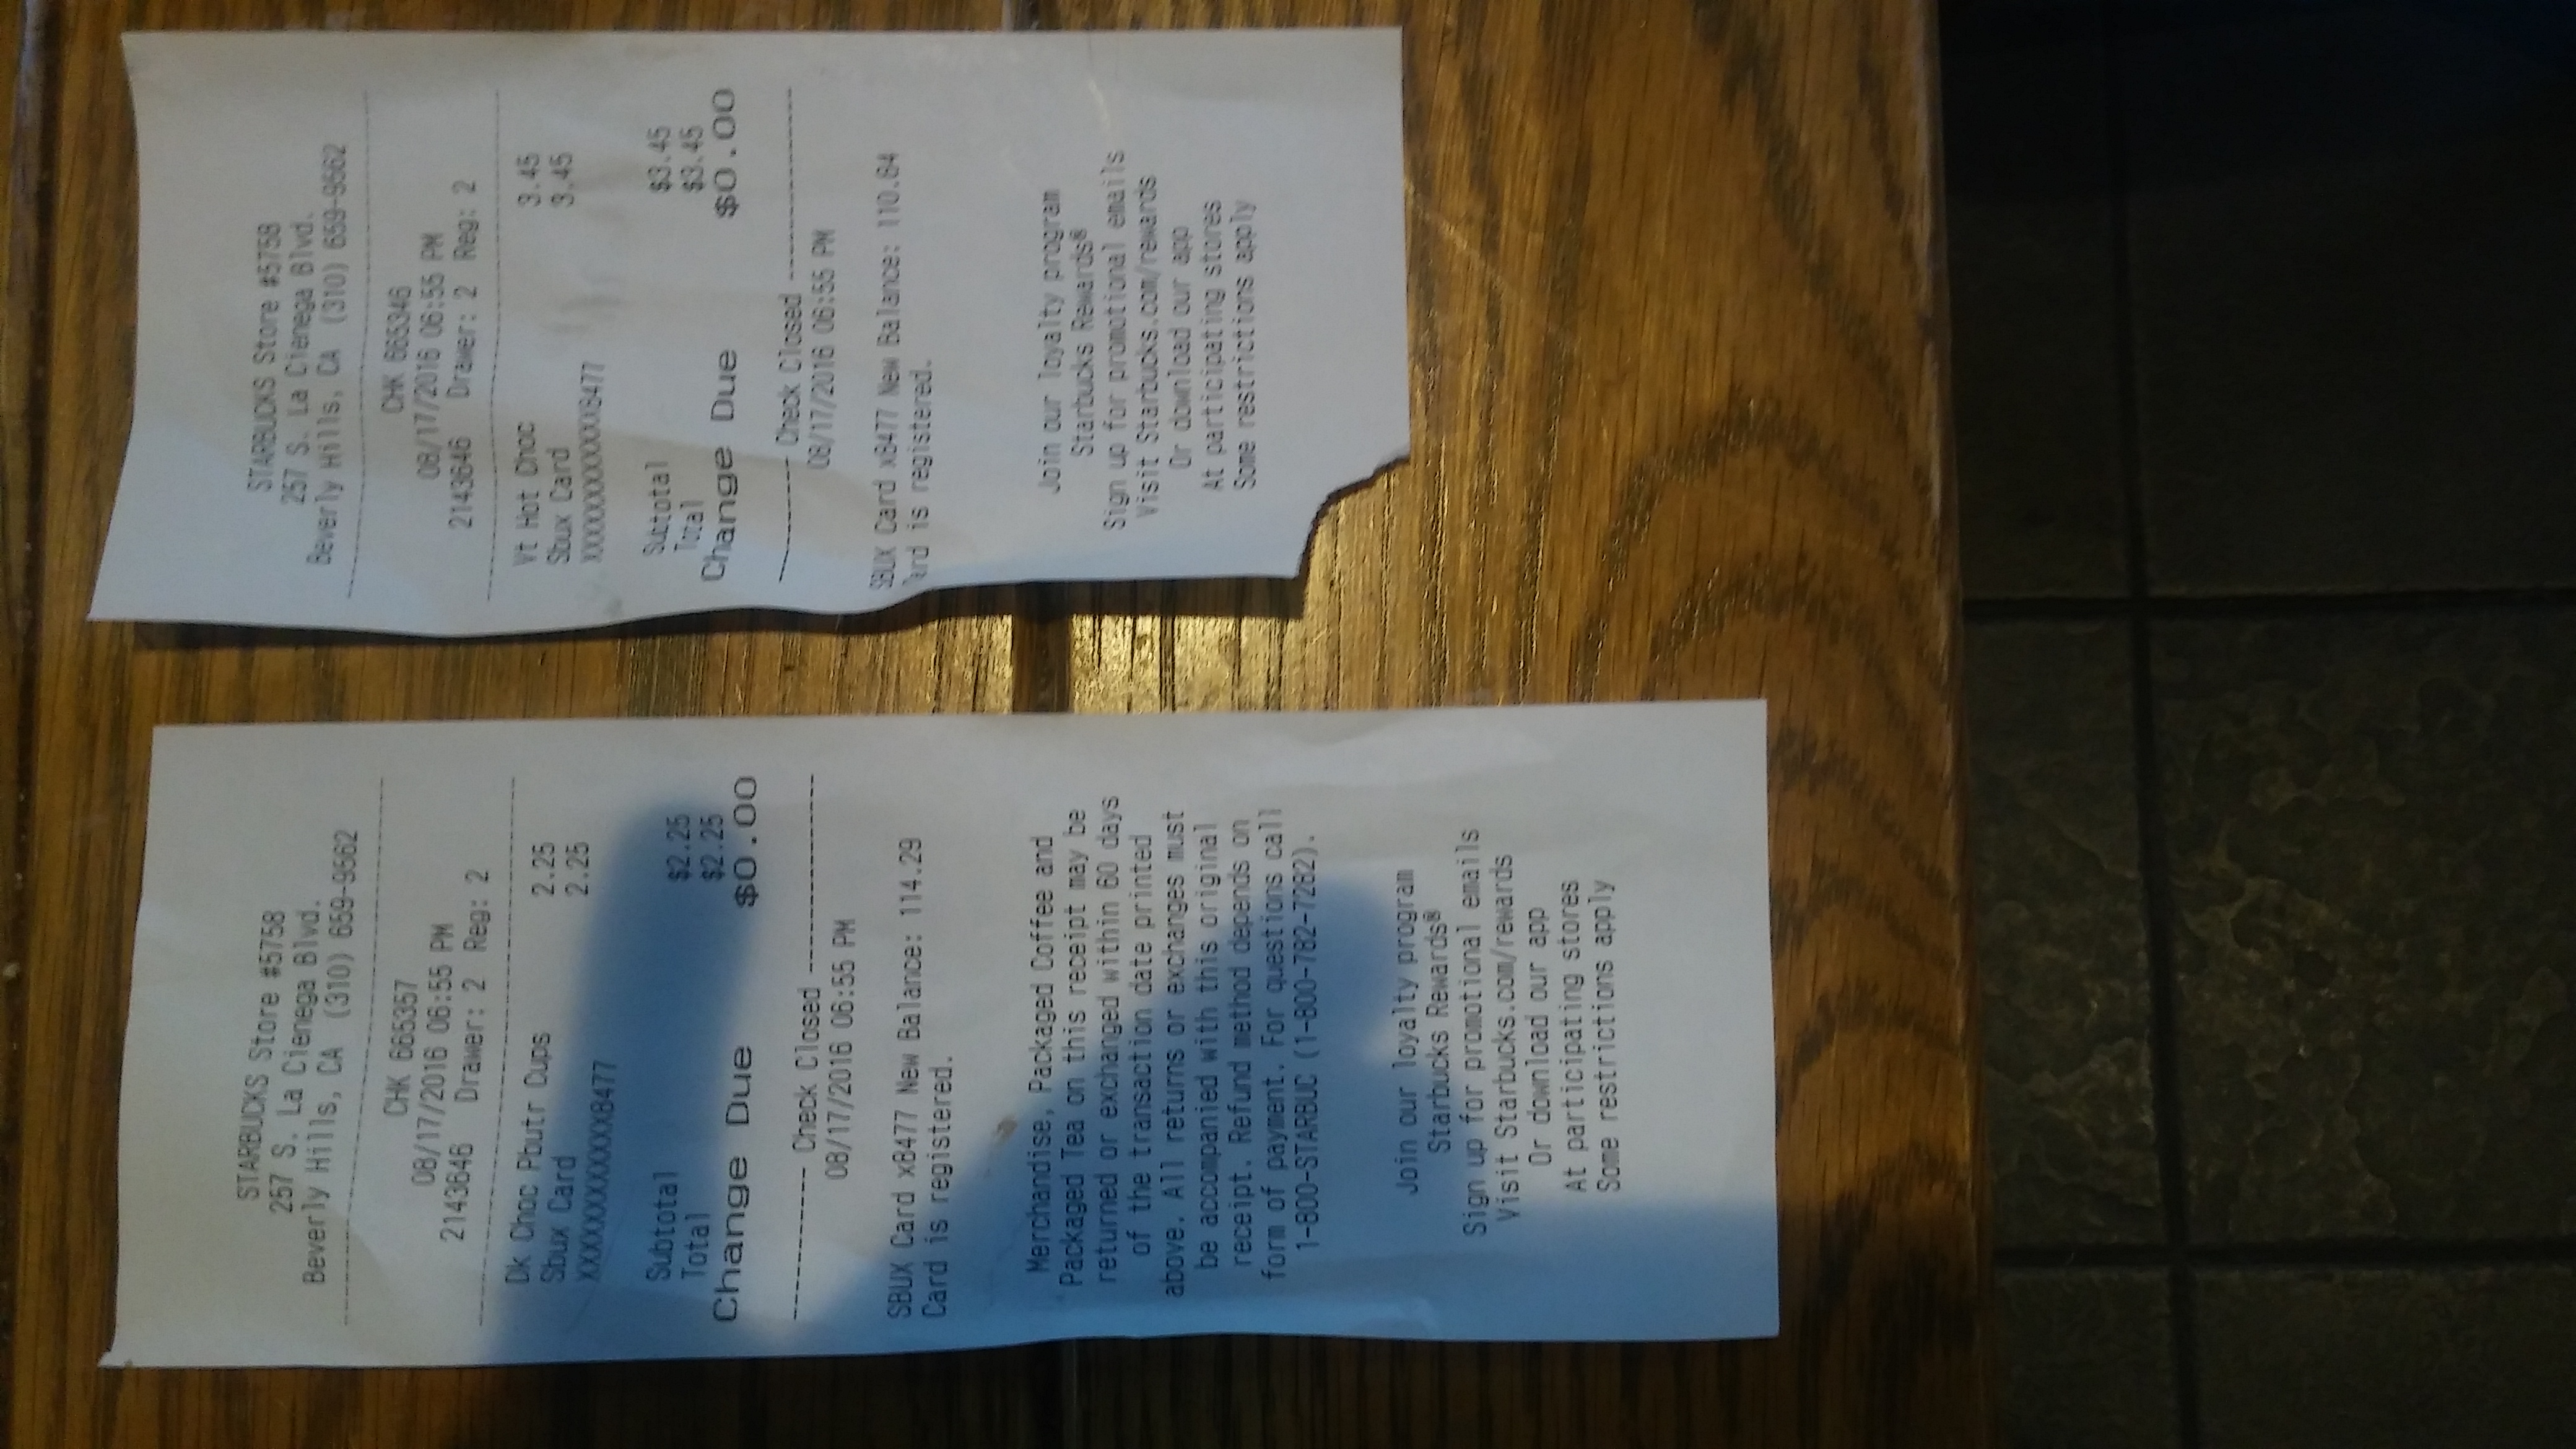 Proof Of My Two Receipts Just To Prove That I Was A Legitimate Customer!